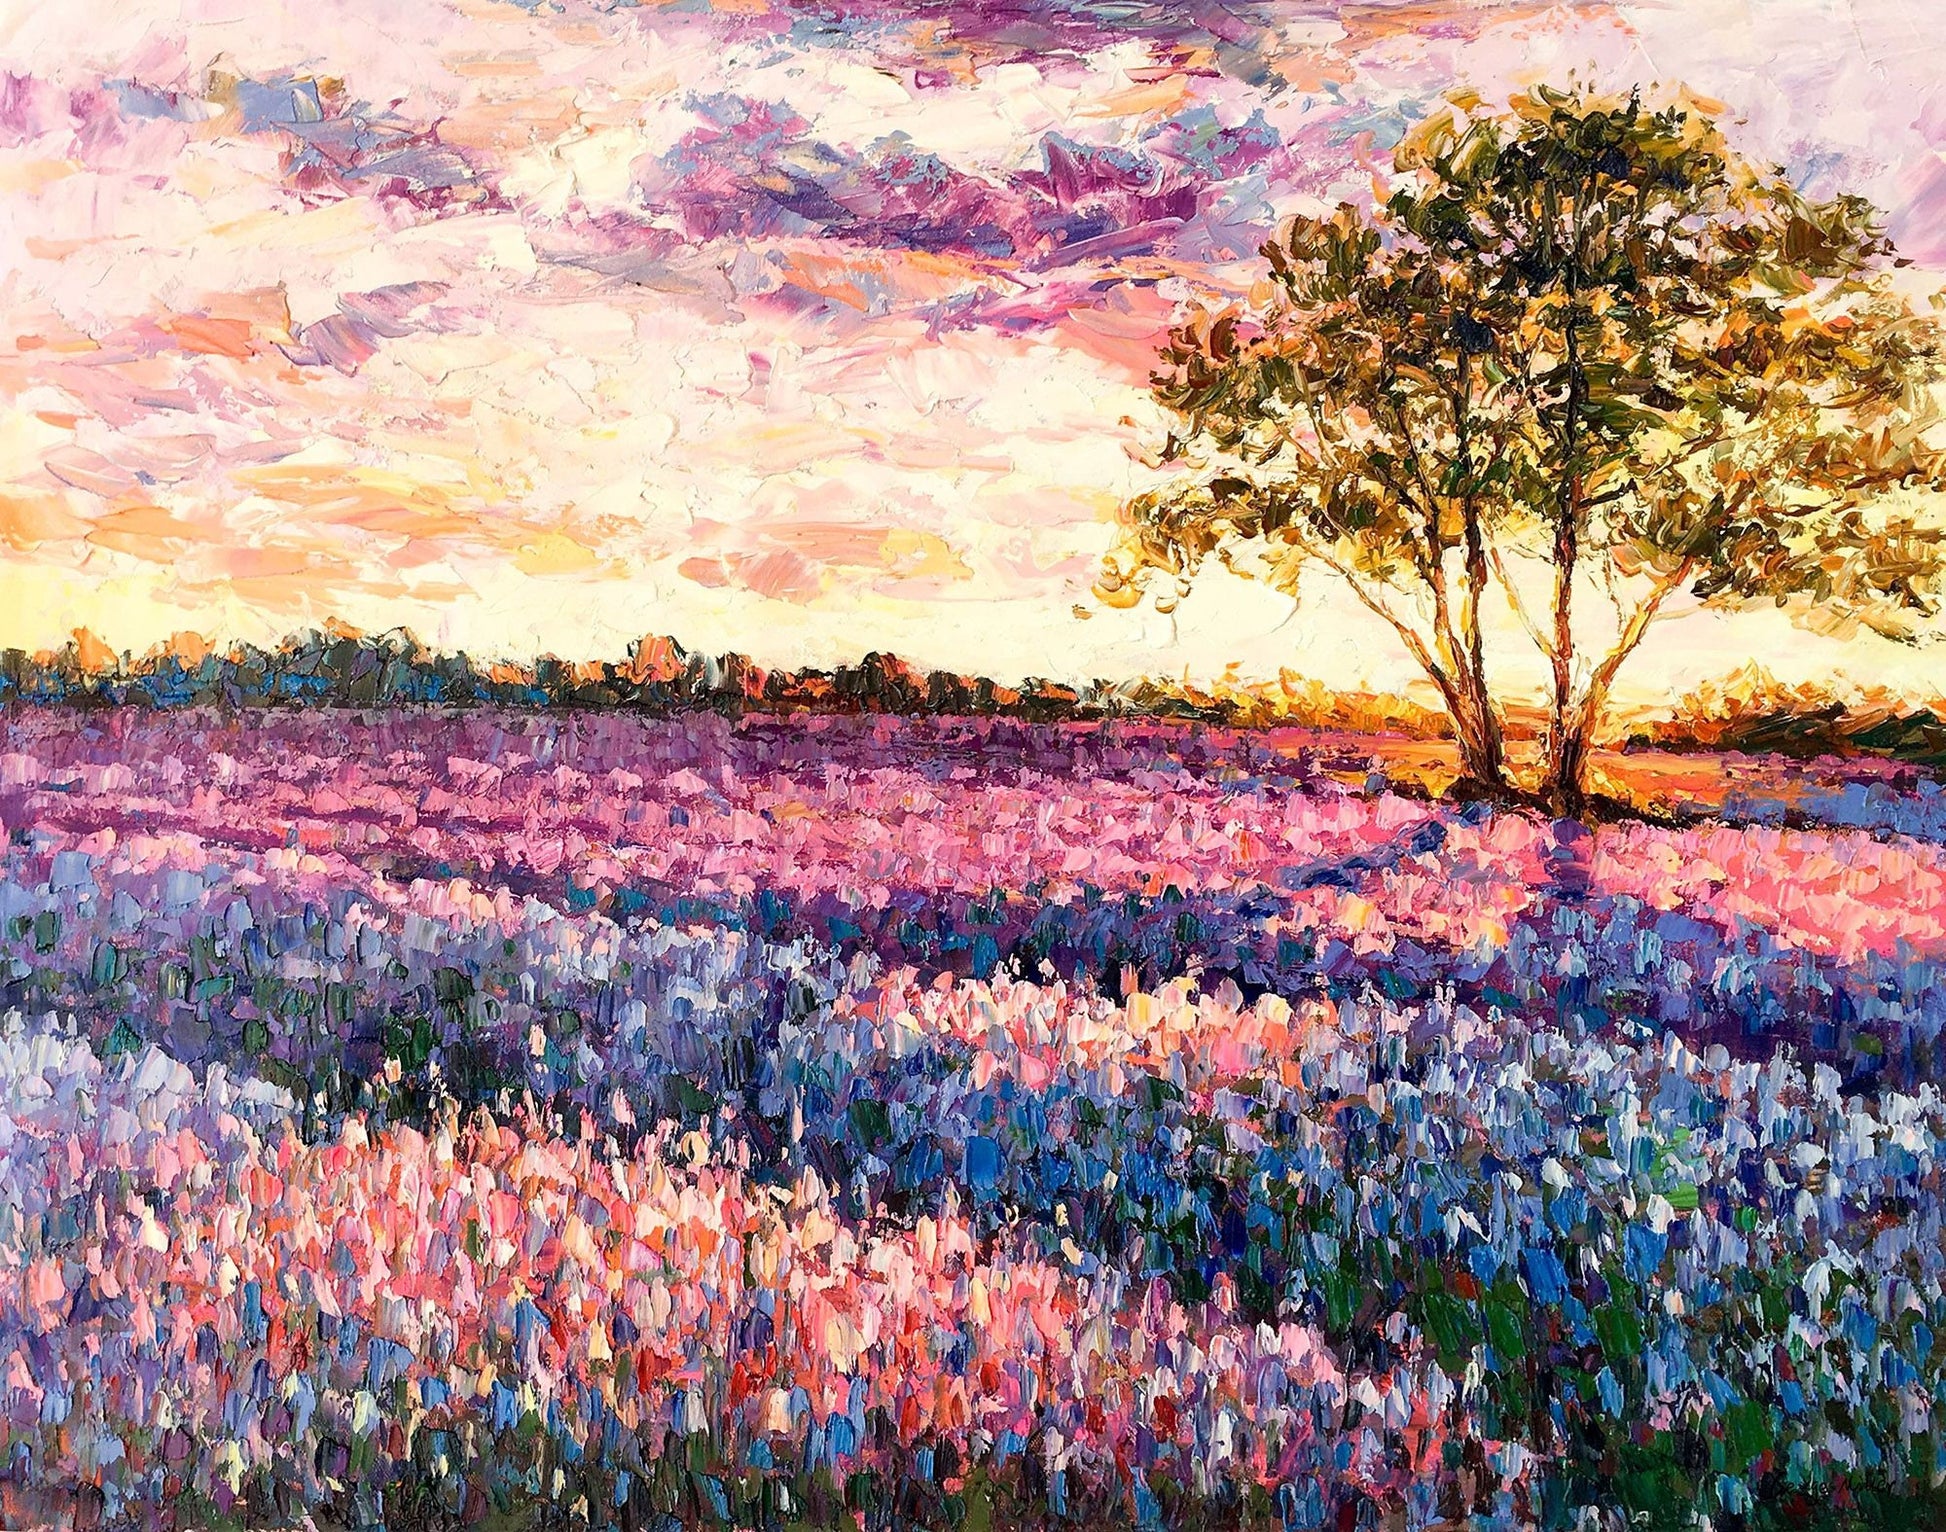 Landscape Oil Paintings Italian Tuscany Lavender Fields at Dawn, Modern Painting, Family Wall Decor, Canvas Painting, Painting Abstract